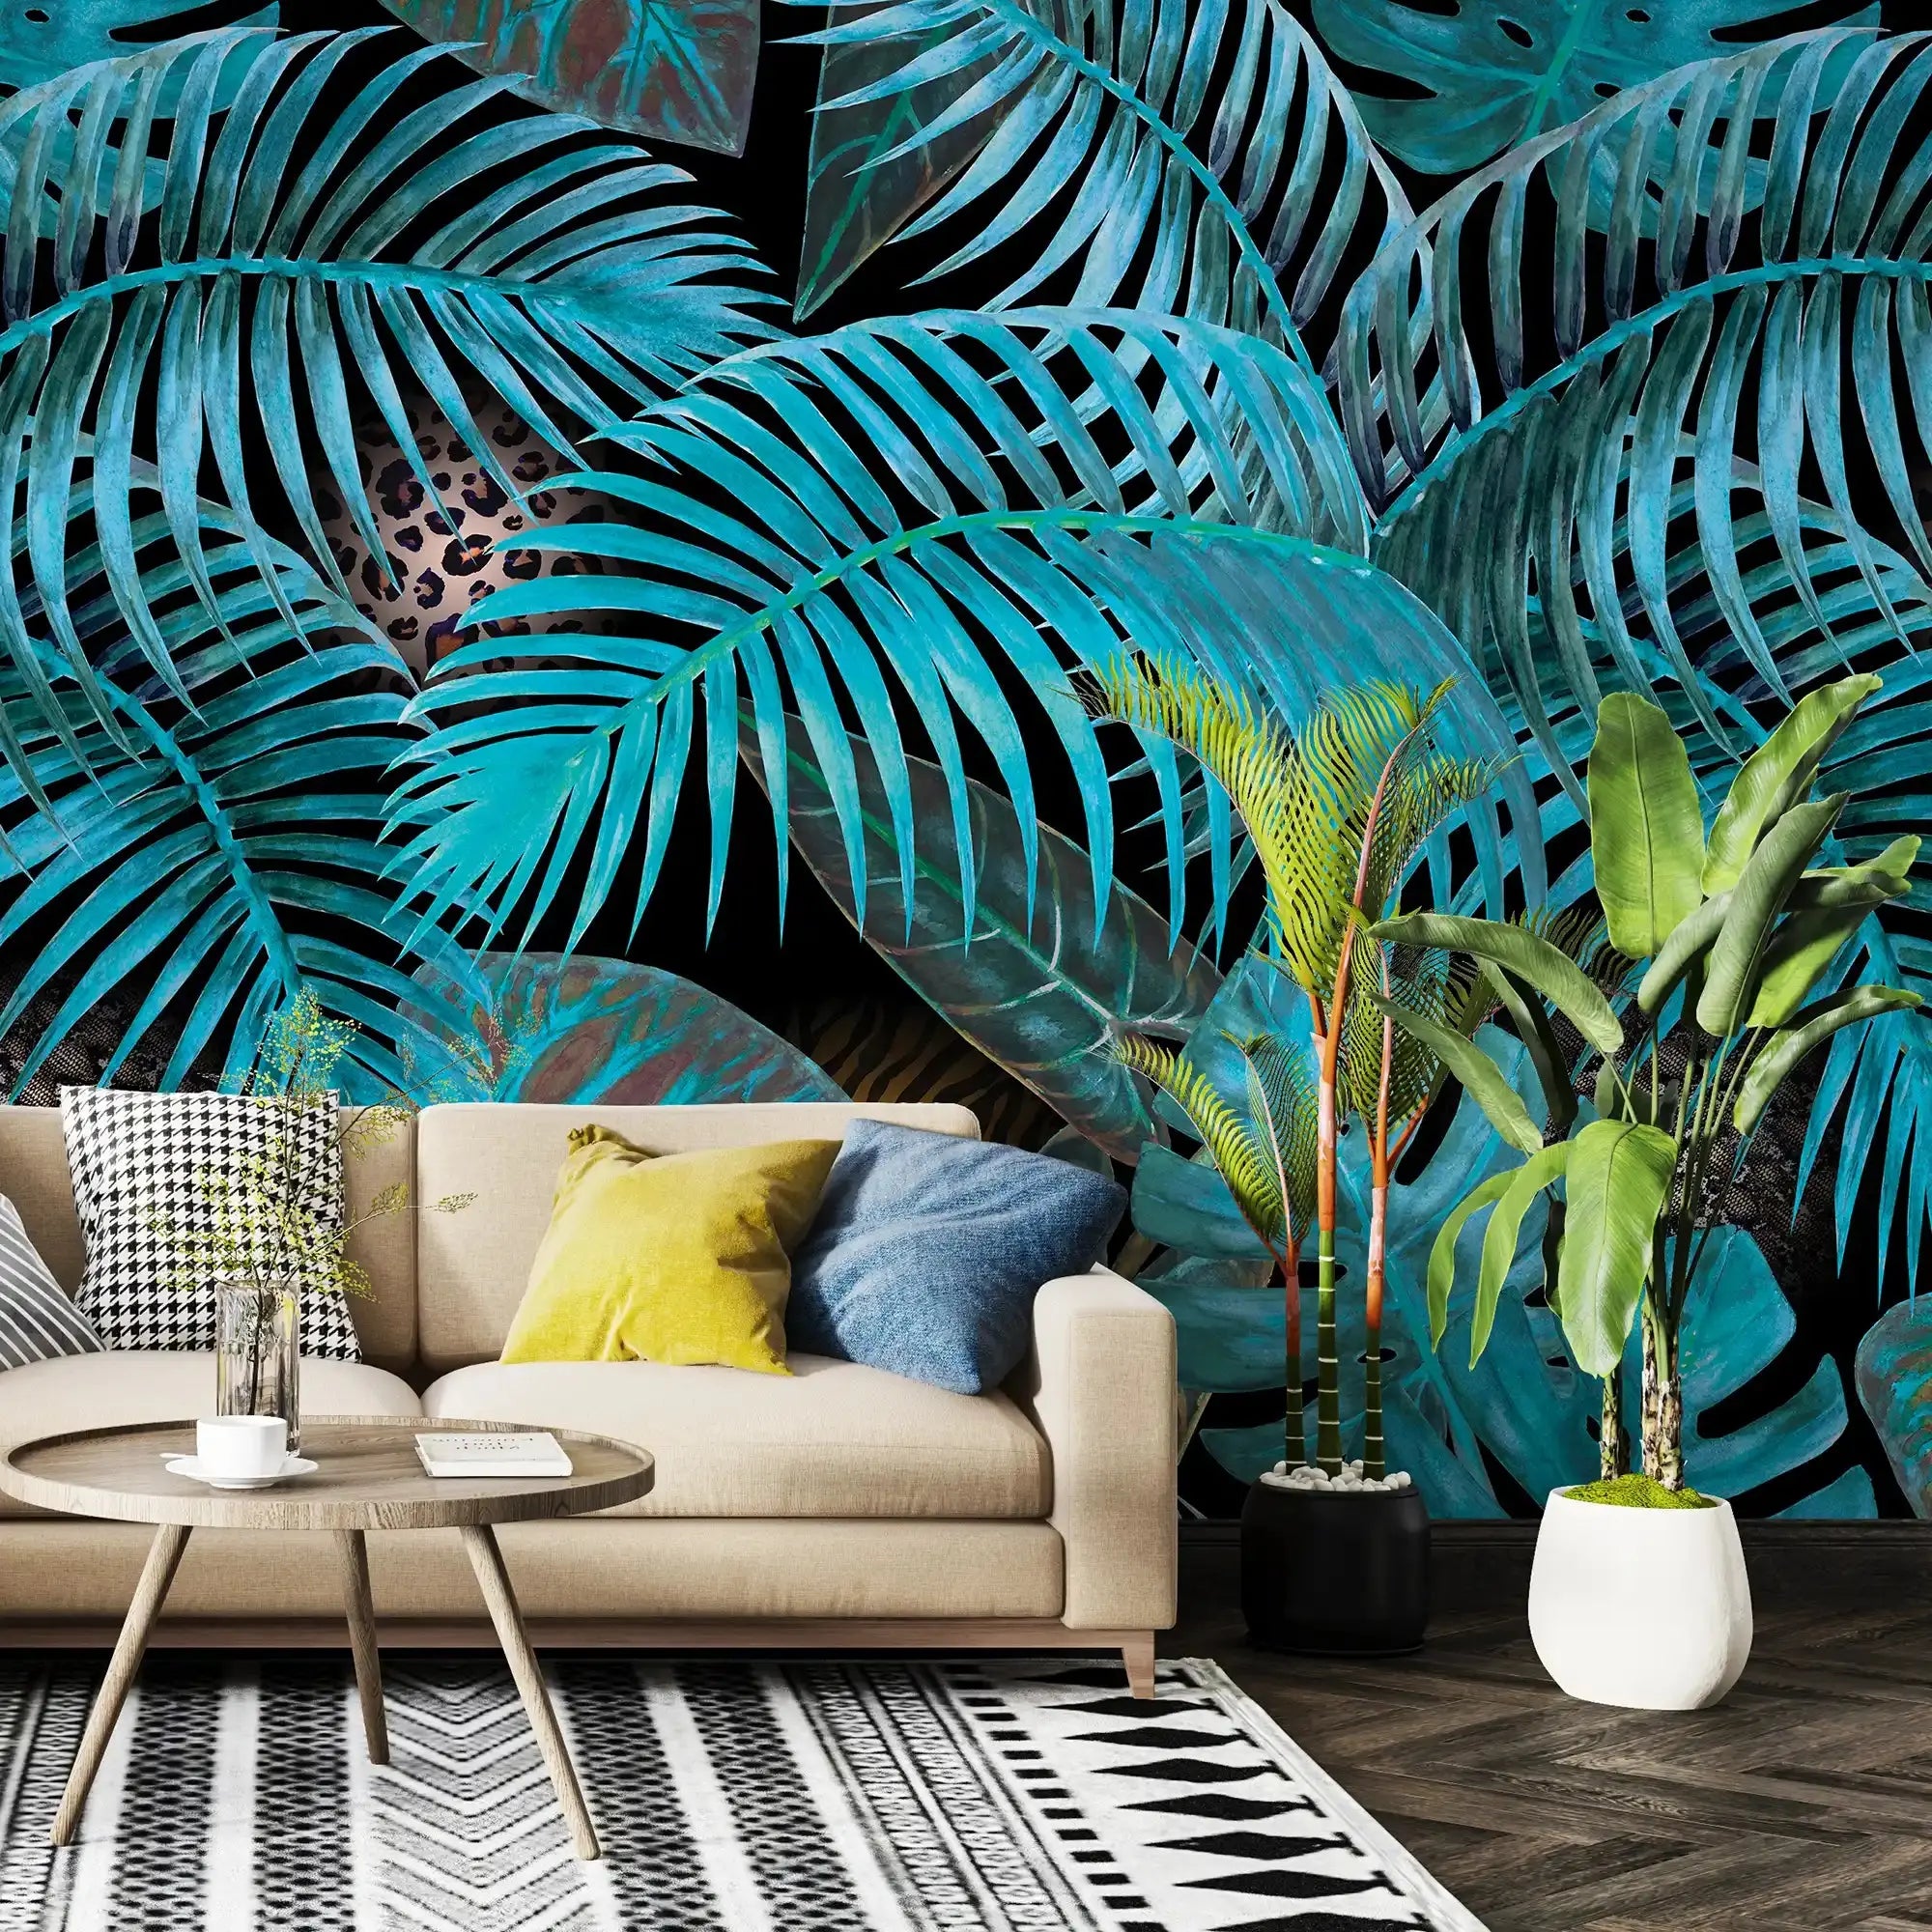 3096-B / Jungle Leaves Wallpaper - Tropical Botanical Wall Decor - Self Adhesive, Peel and Stick - Modern and Contemporary - Artevella